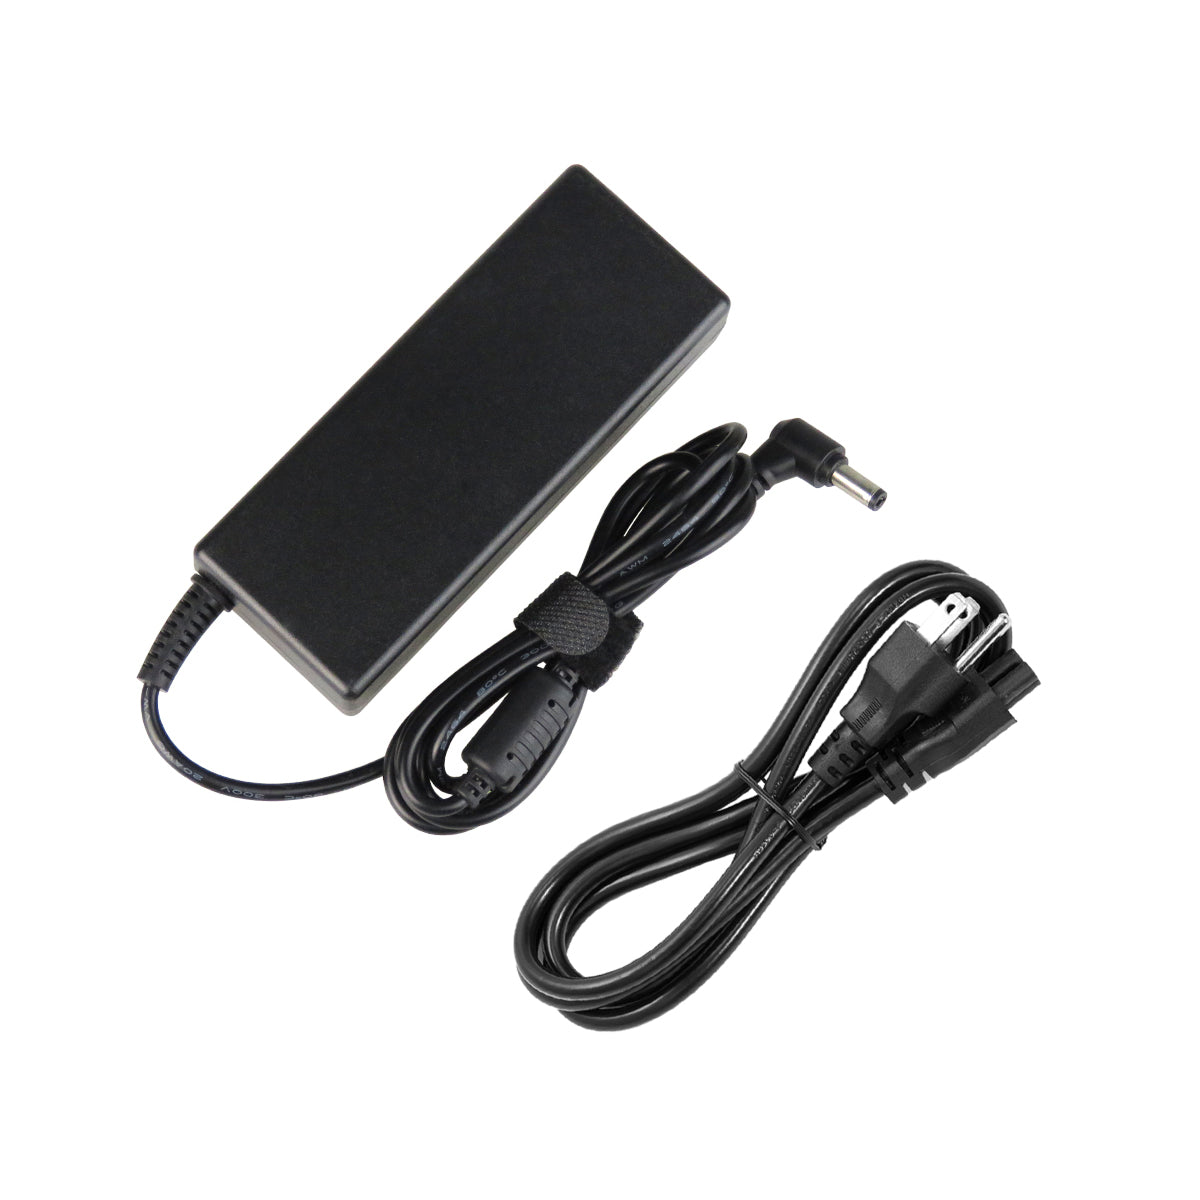 AC Adapter Charger for Gateway S-7235 Notebook.